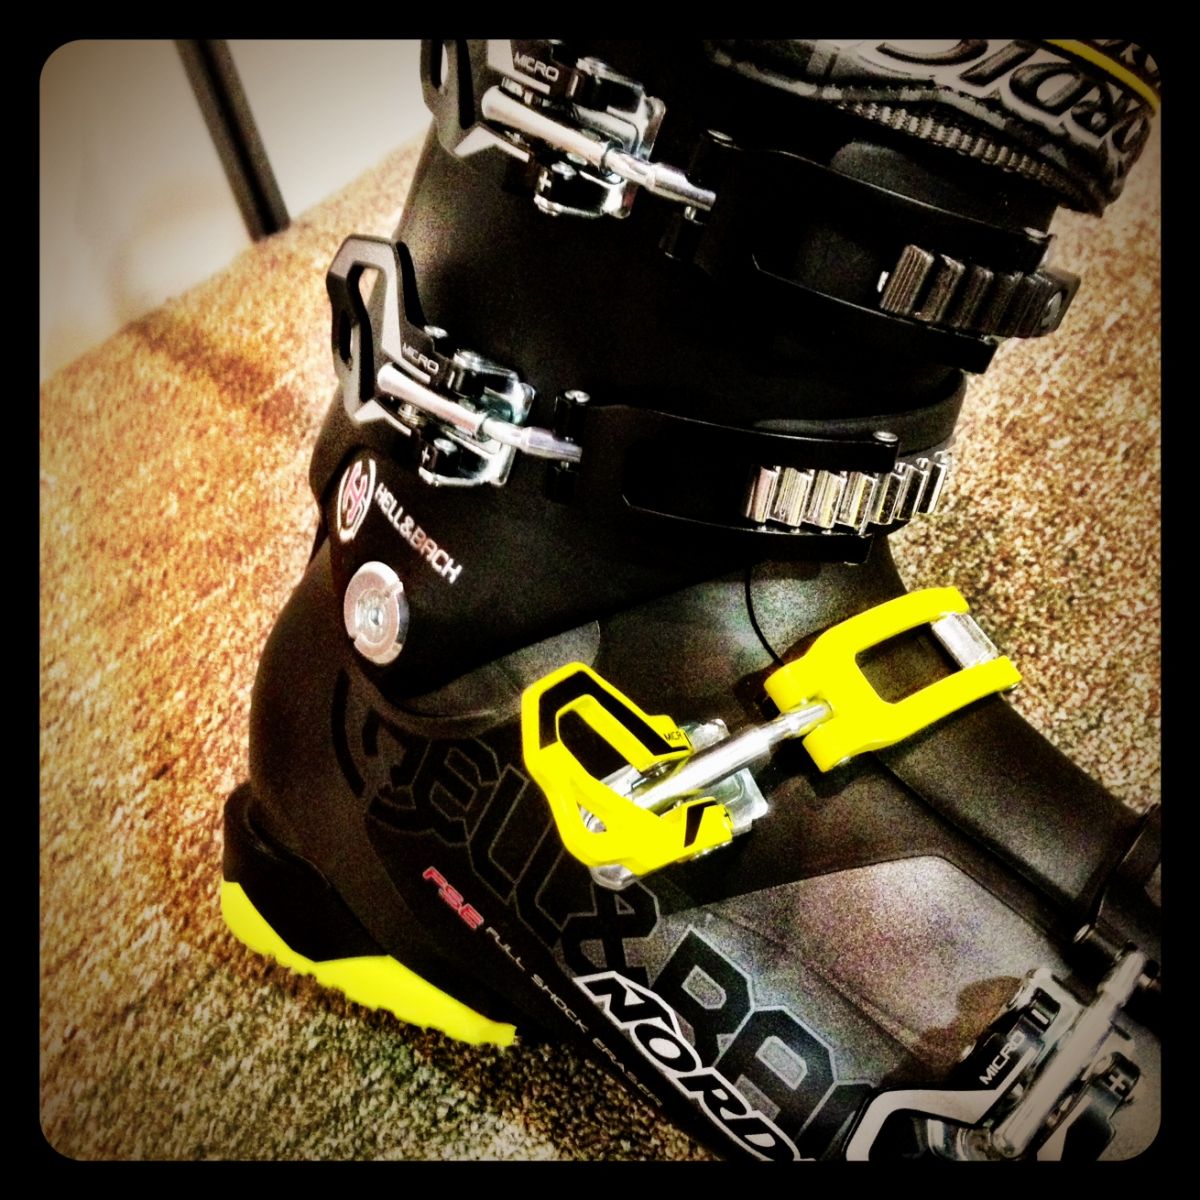 Nordica Hell and Back Ski Boots, Ski Boot Review